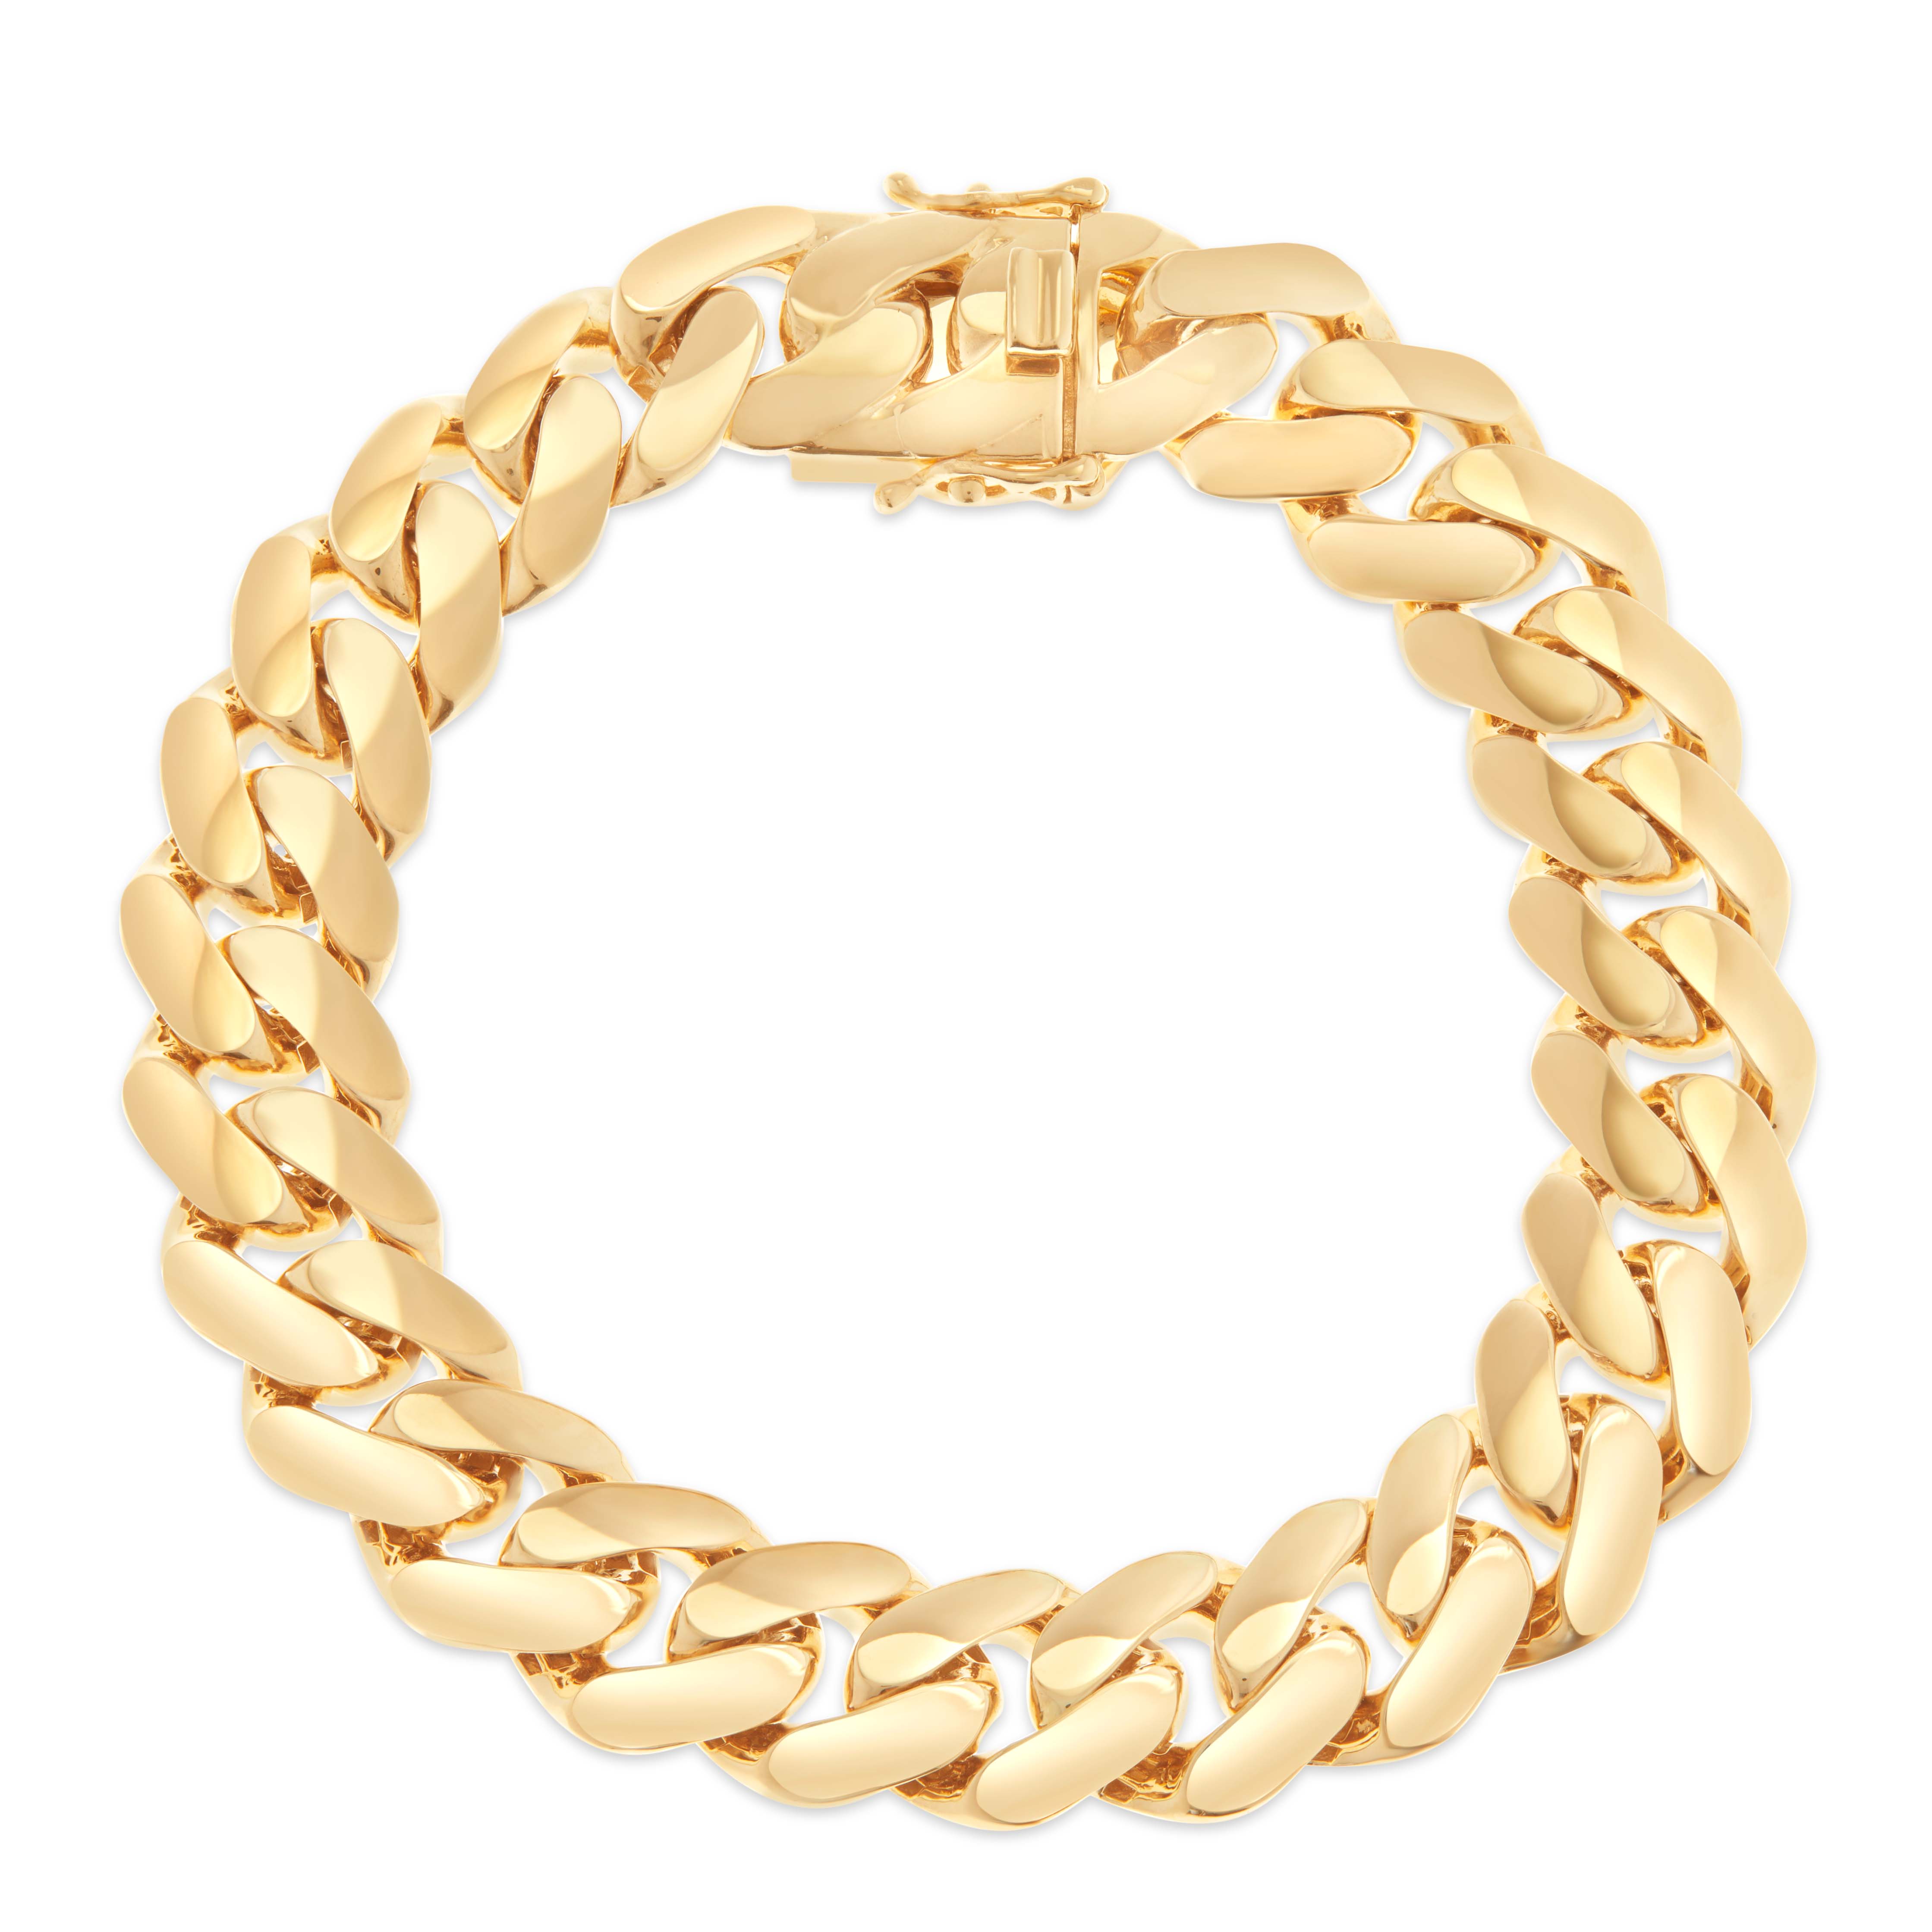 1.5 Kilo Miami Cuban Link Chain Solid 14K Yellow Gold Necklace for Men